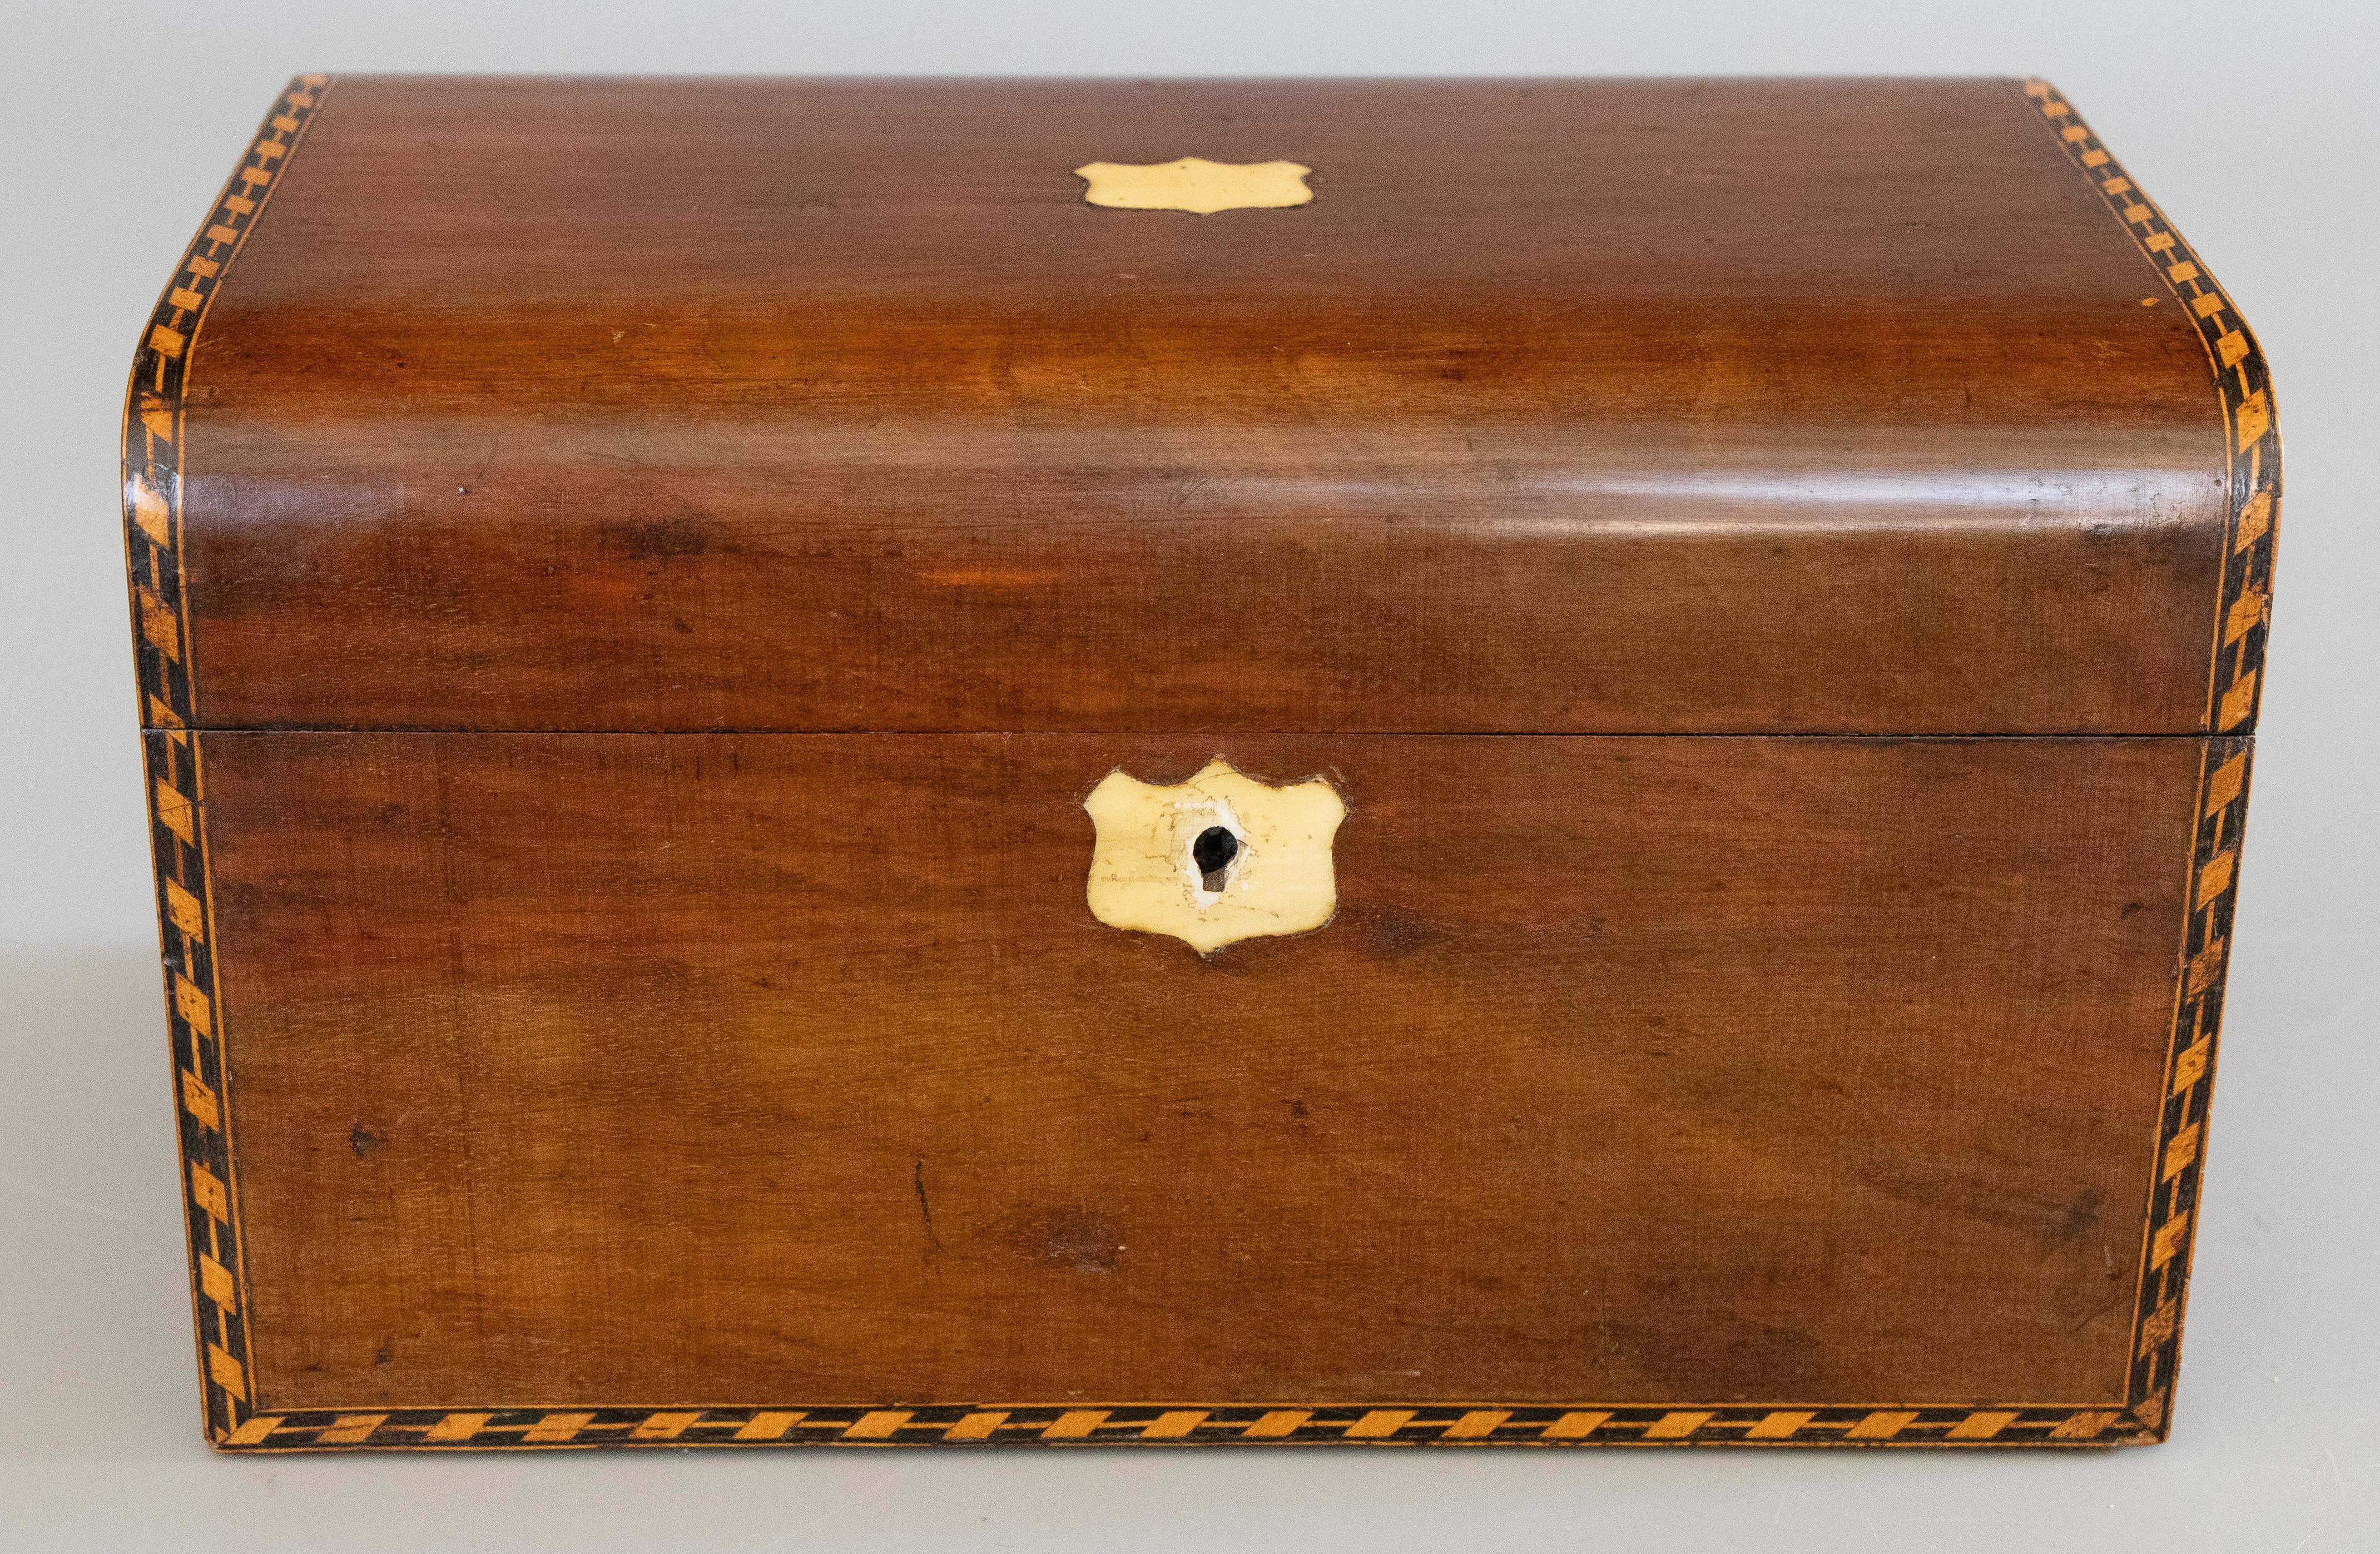 A superb 19th Century English walnut box with lock and key, circa 1870. This fine antique box has a wonderful domed lid accented with tunbridge bands along the edges and a mother of pearl center and key plate. This large hand crafted box has been